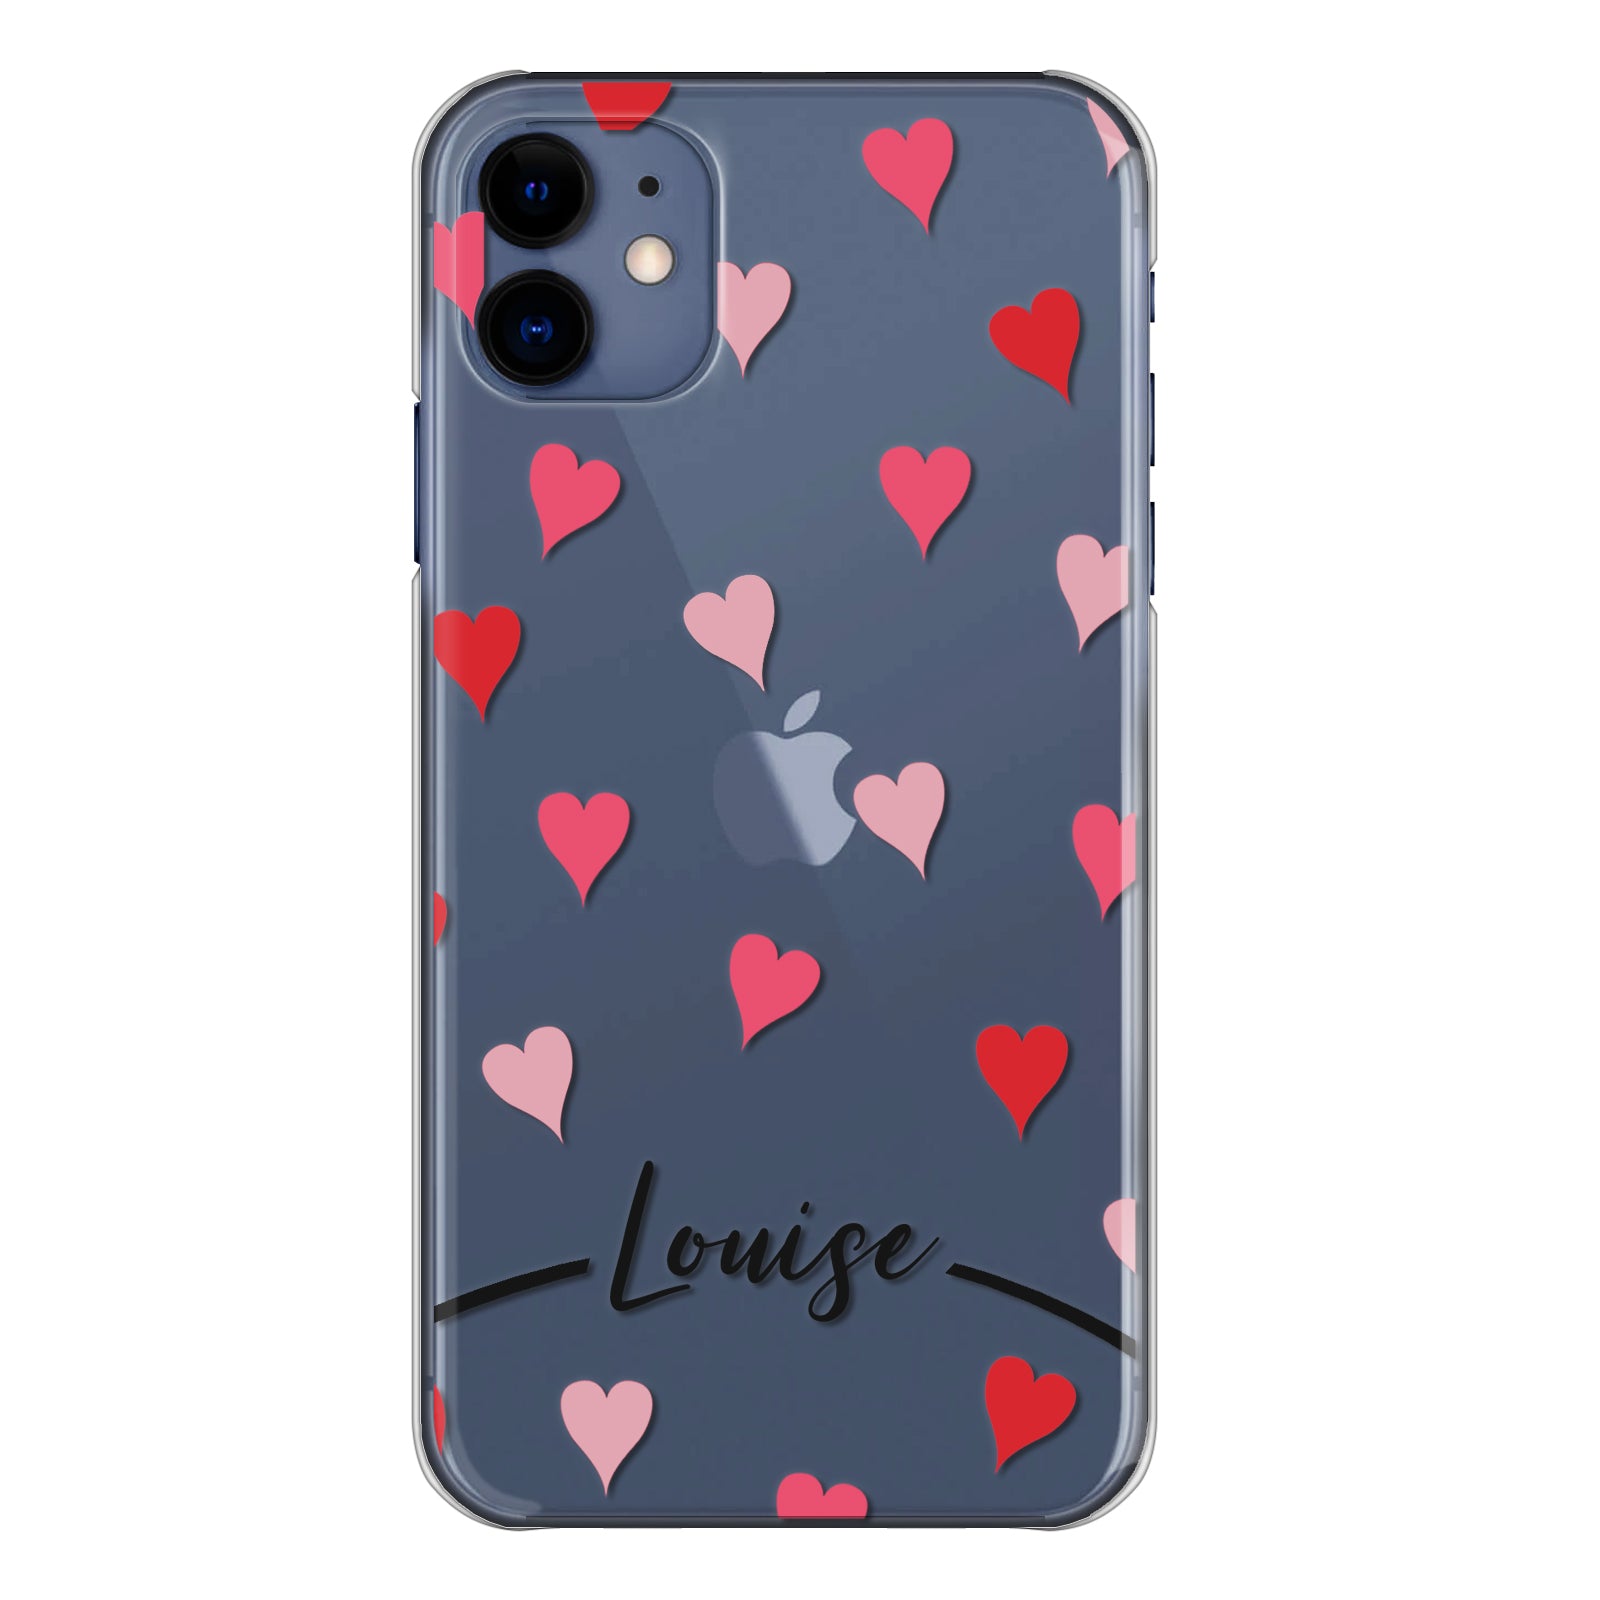 Personalised LG Phone Hard Case with Love Hearts and Stylish Text